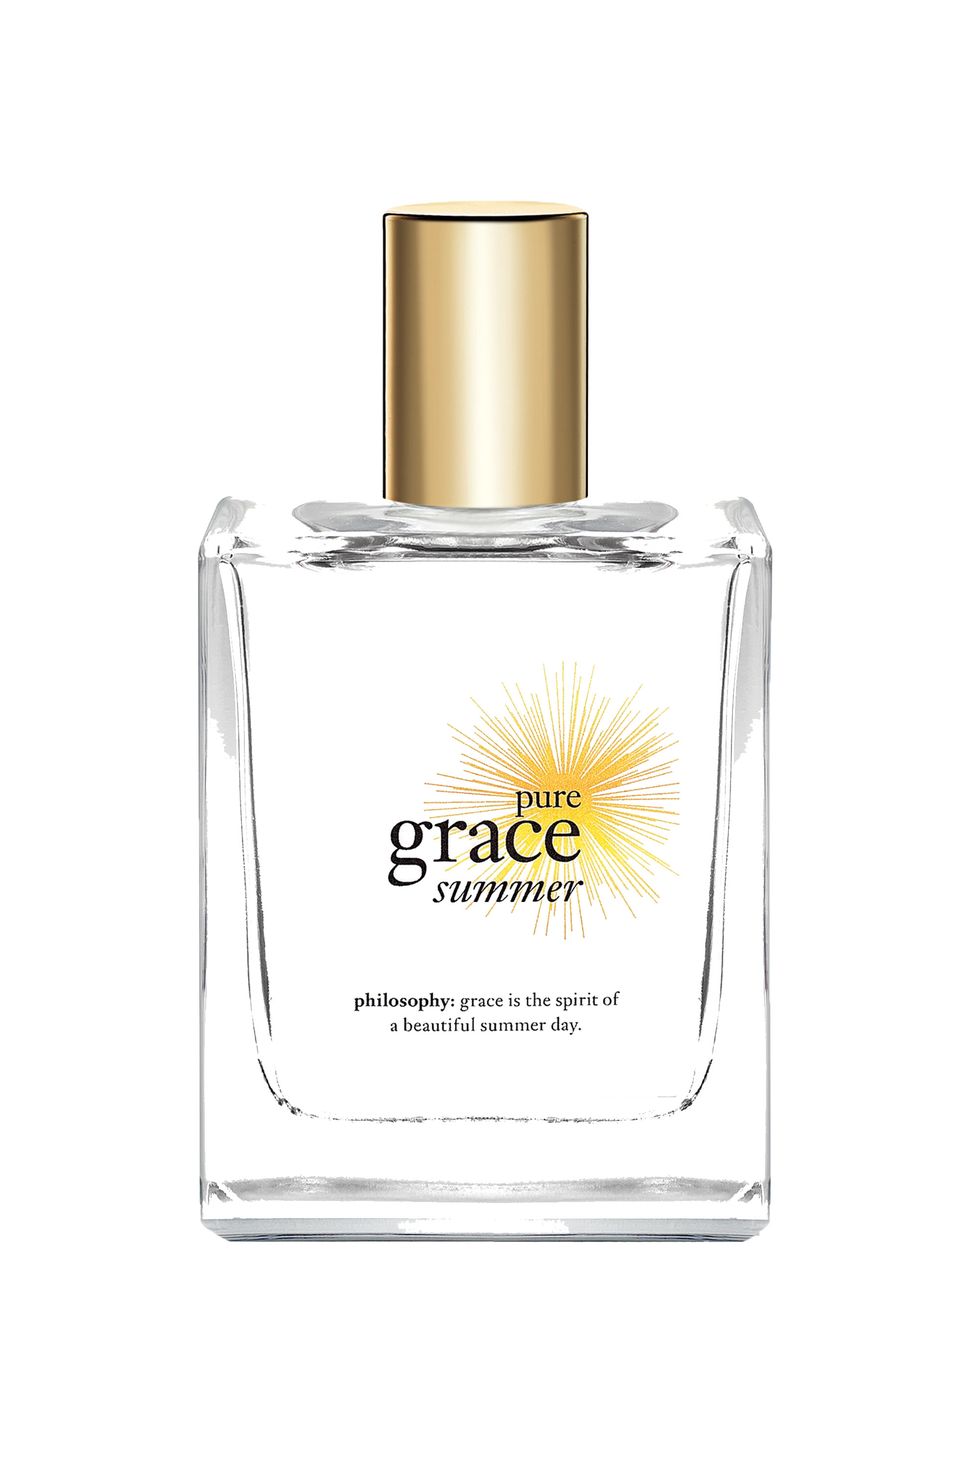 <p>We would classify this as a t-shirt scent because its breezy, uplifting mix of citron zest, coconut water, vanilla, and sandalwood is so summery and casual. Consider it your new Saturday afternoon go-to. </p><p><br></p><p>$48, for 2.0 fl. oz., <a href="http://www.philosophy.com/pure-grace-summer-spray-fragrance.html?cgid=C212" target="_blank">Philosophy.com</a> </p>